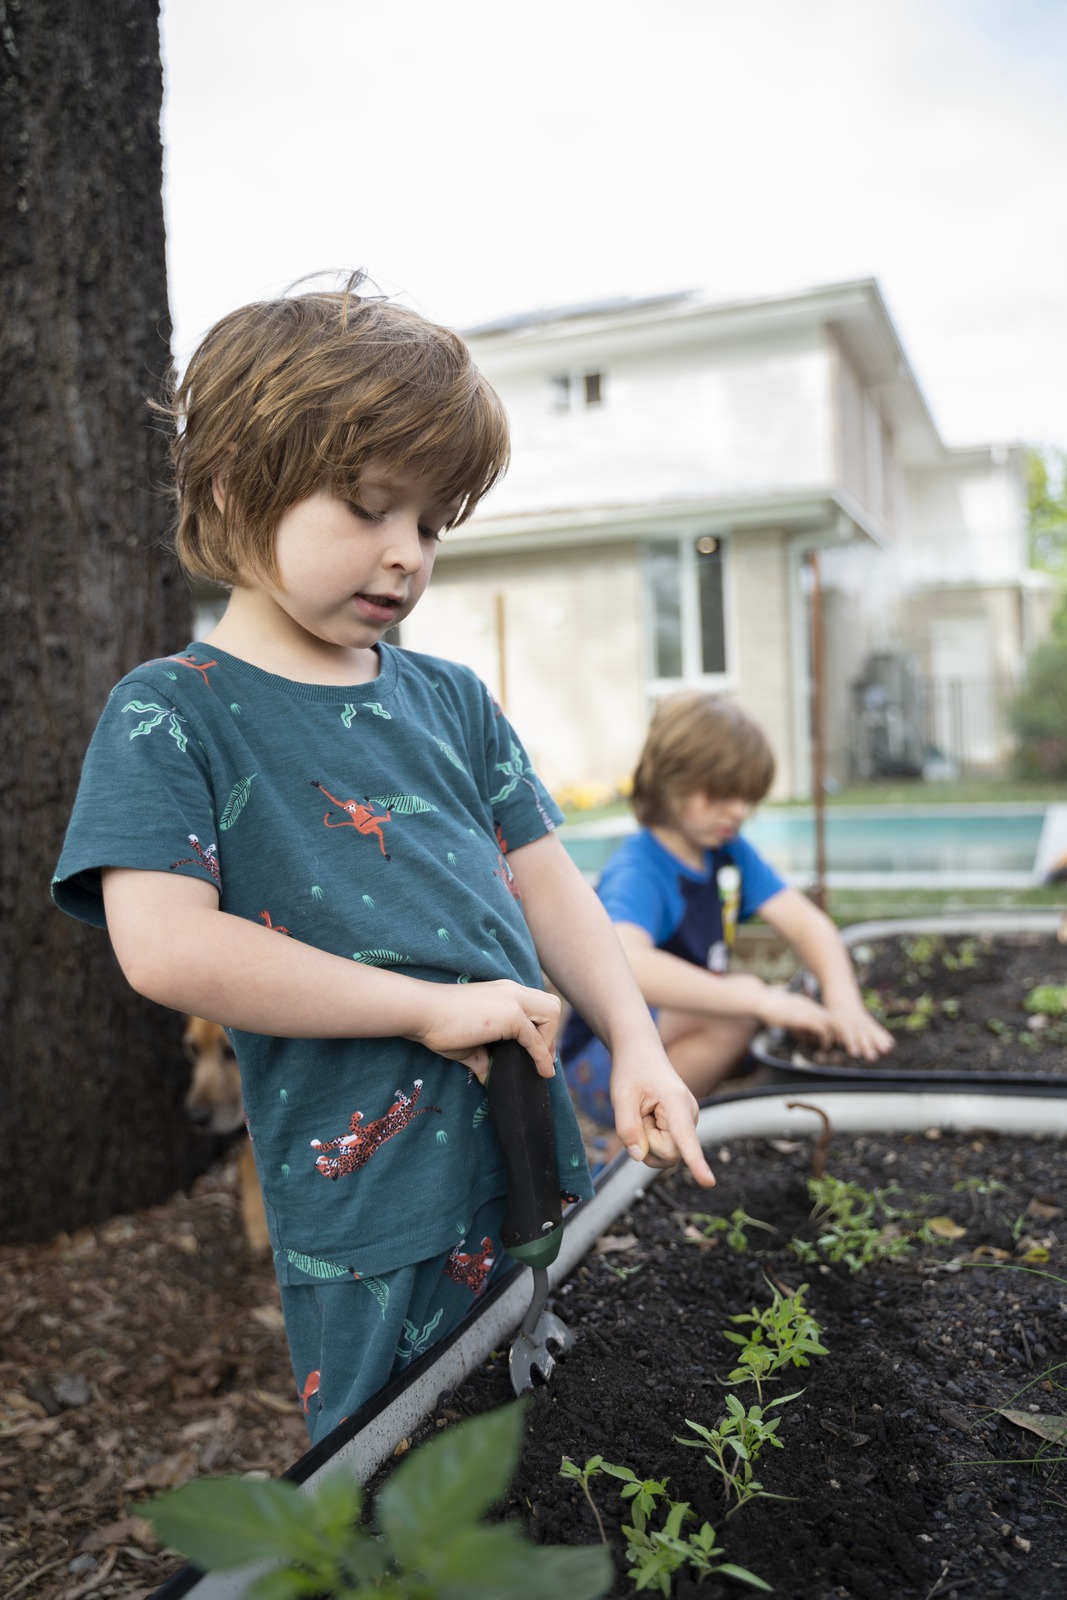 Children gardening at home in Ferny Grove during the Covid-19 pandemic, April 2020